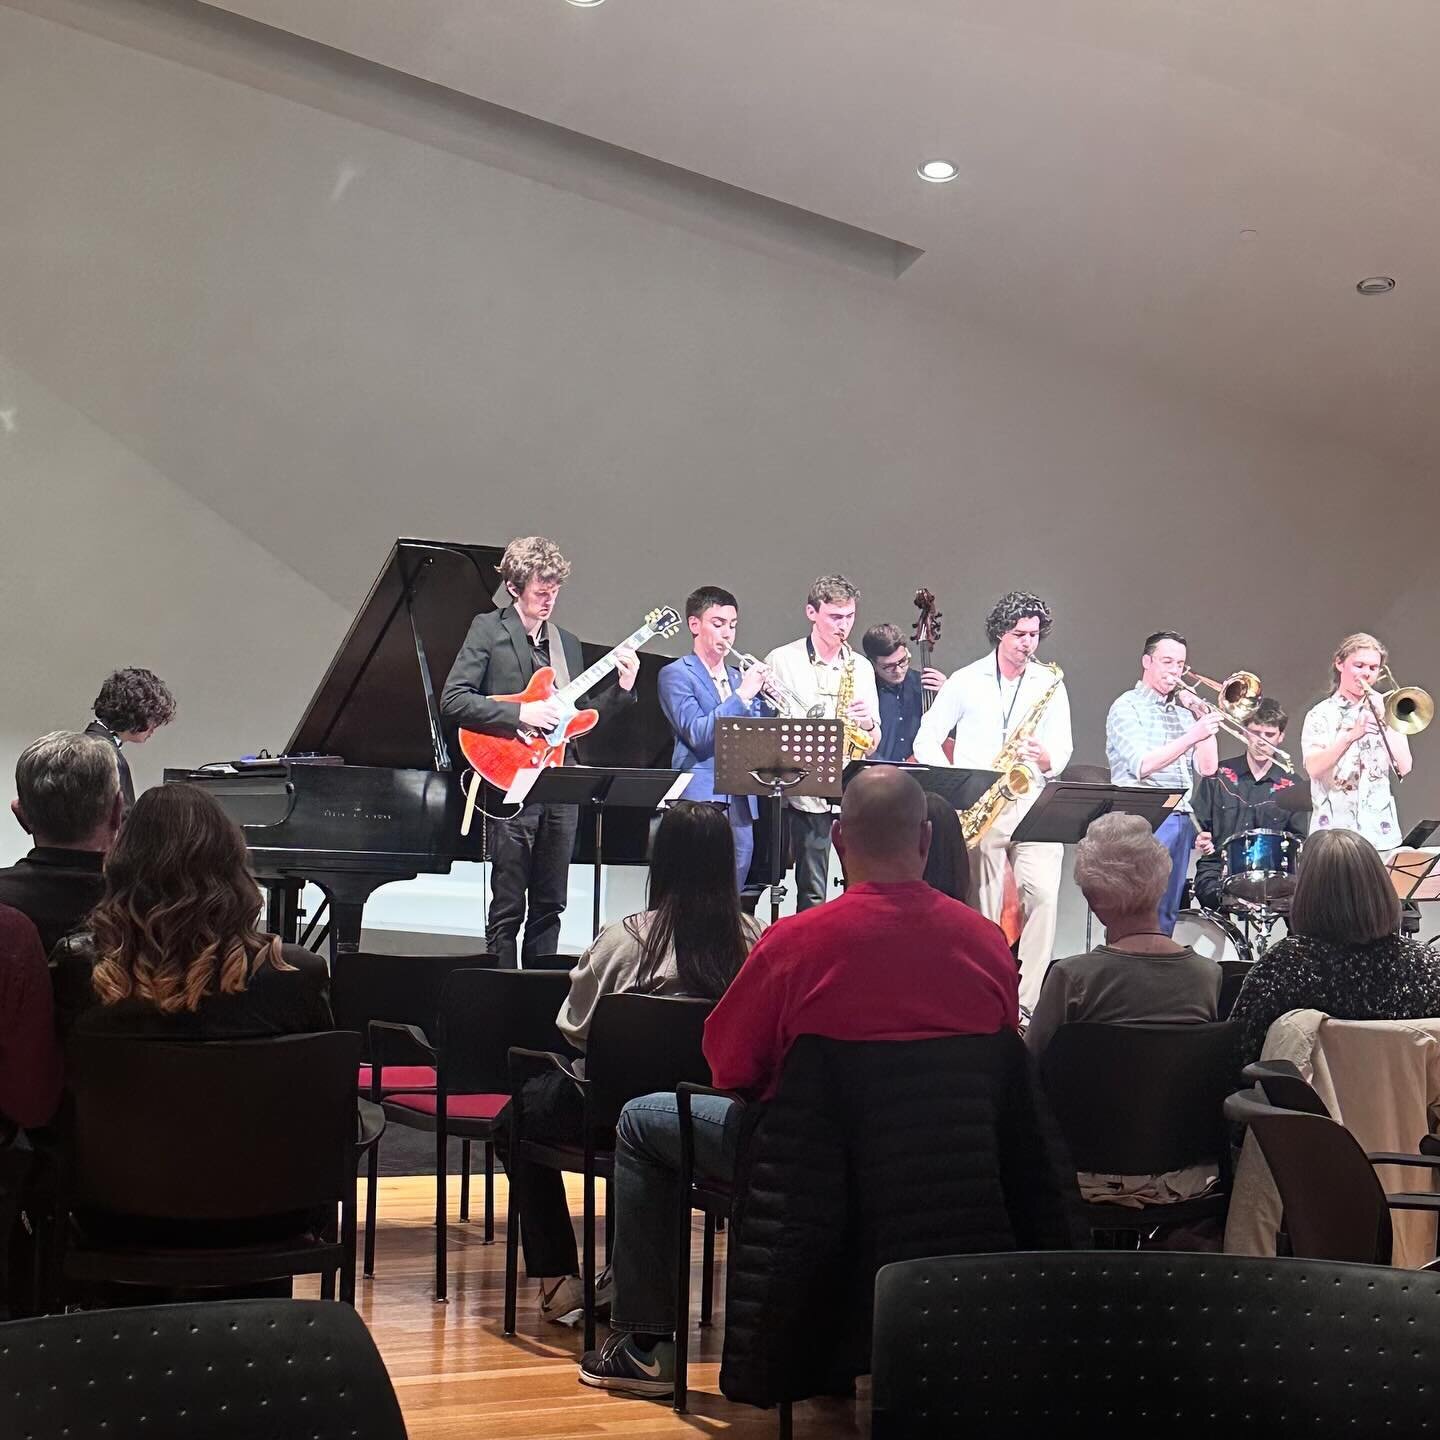 Had a great time being back at KU and performing with their top jazz combo a couple nights ago! A wonderful group of players and they executed my music at an incredibly high level. I love seeing the program that was so important to my development con